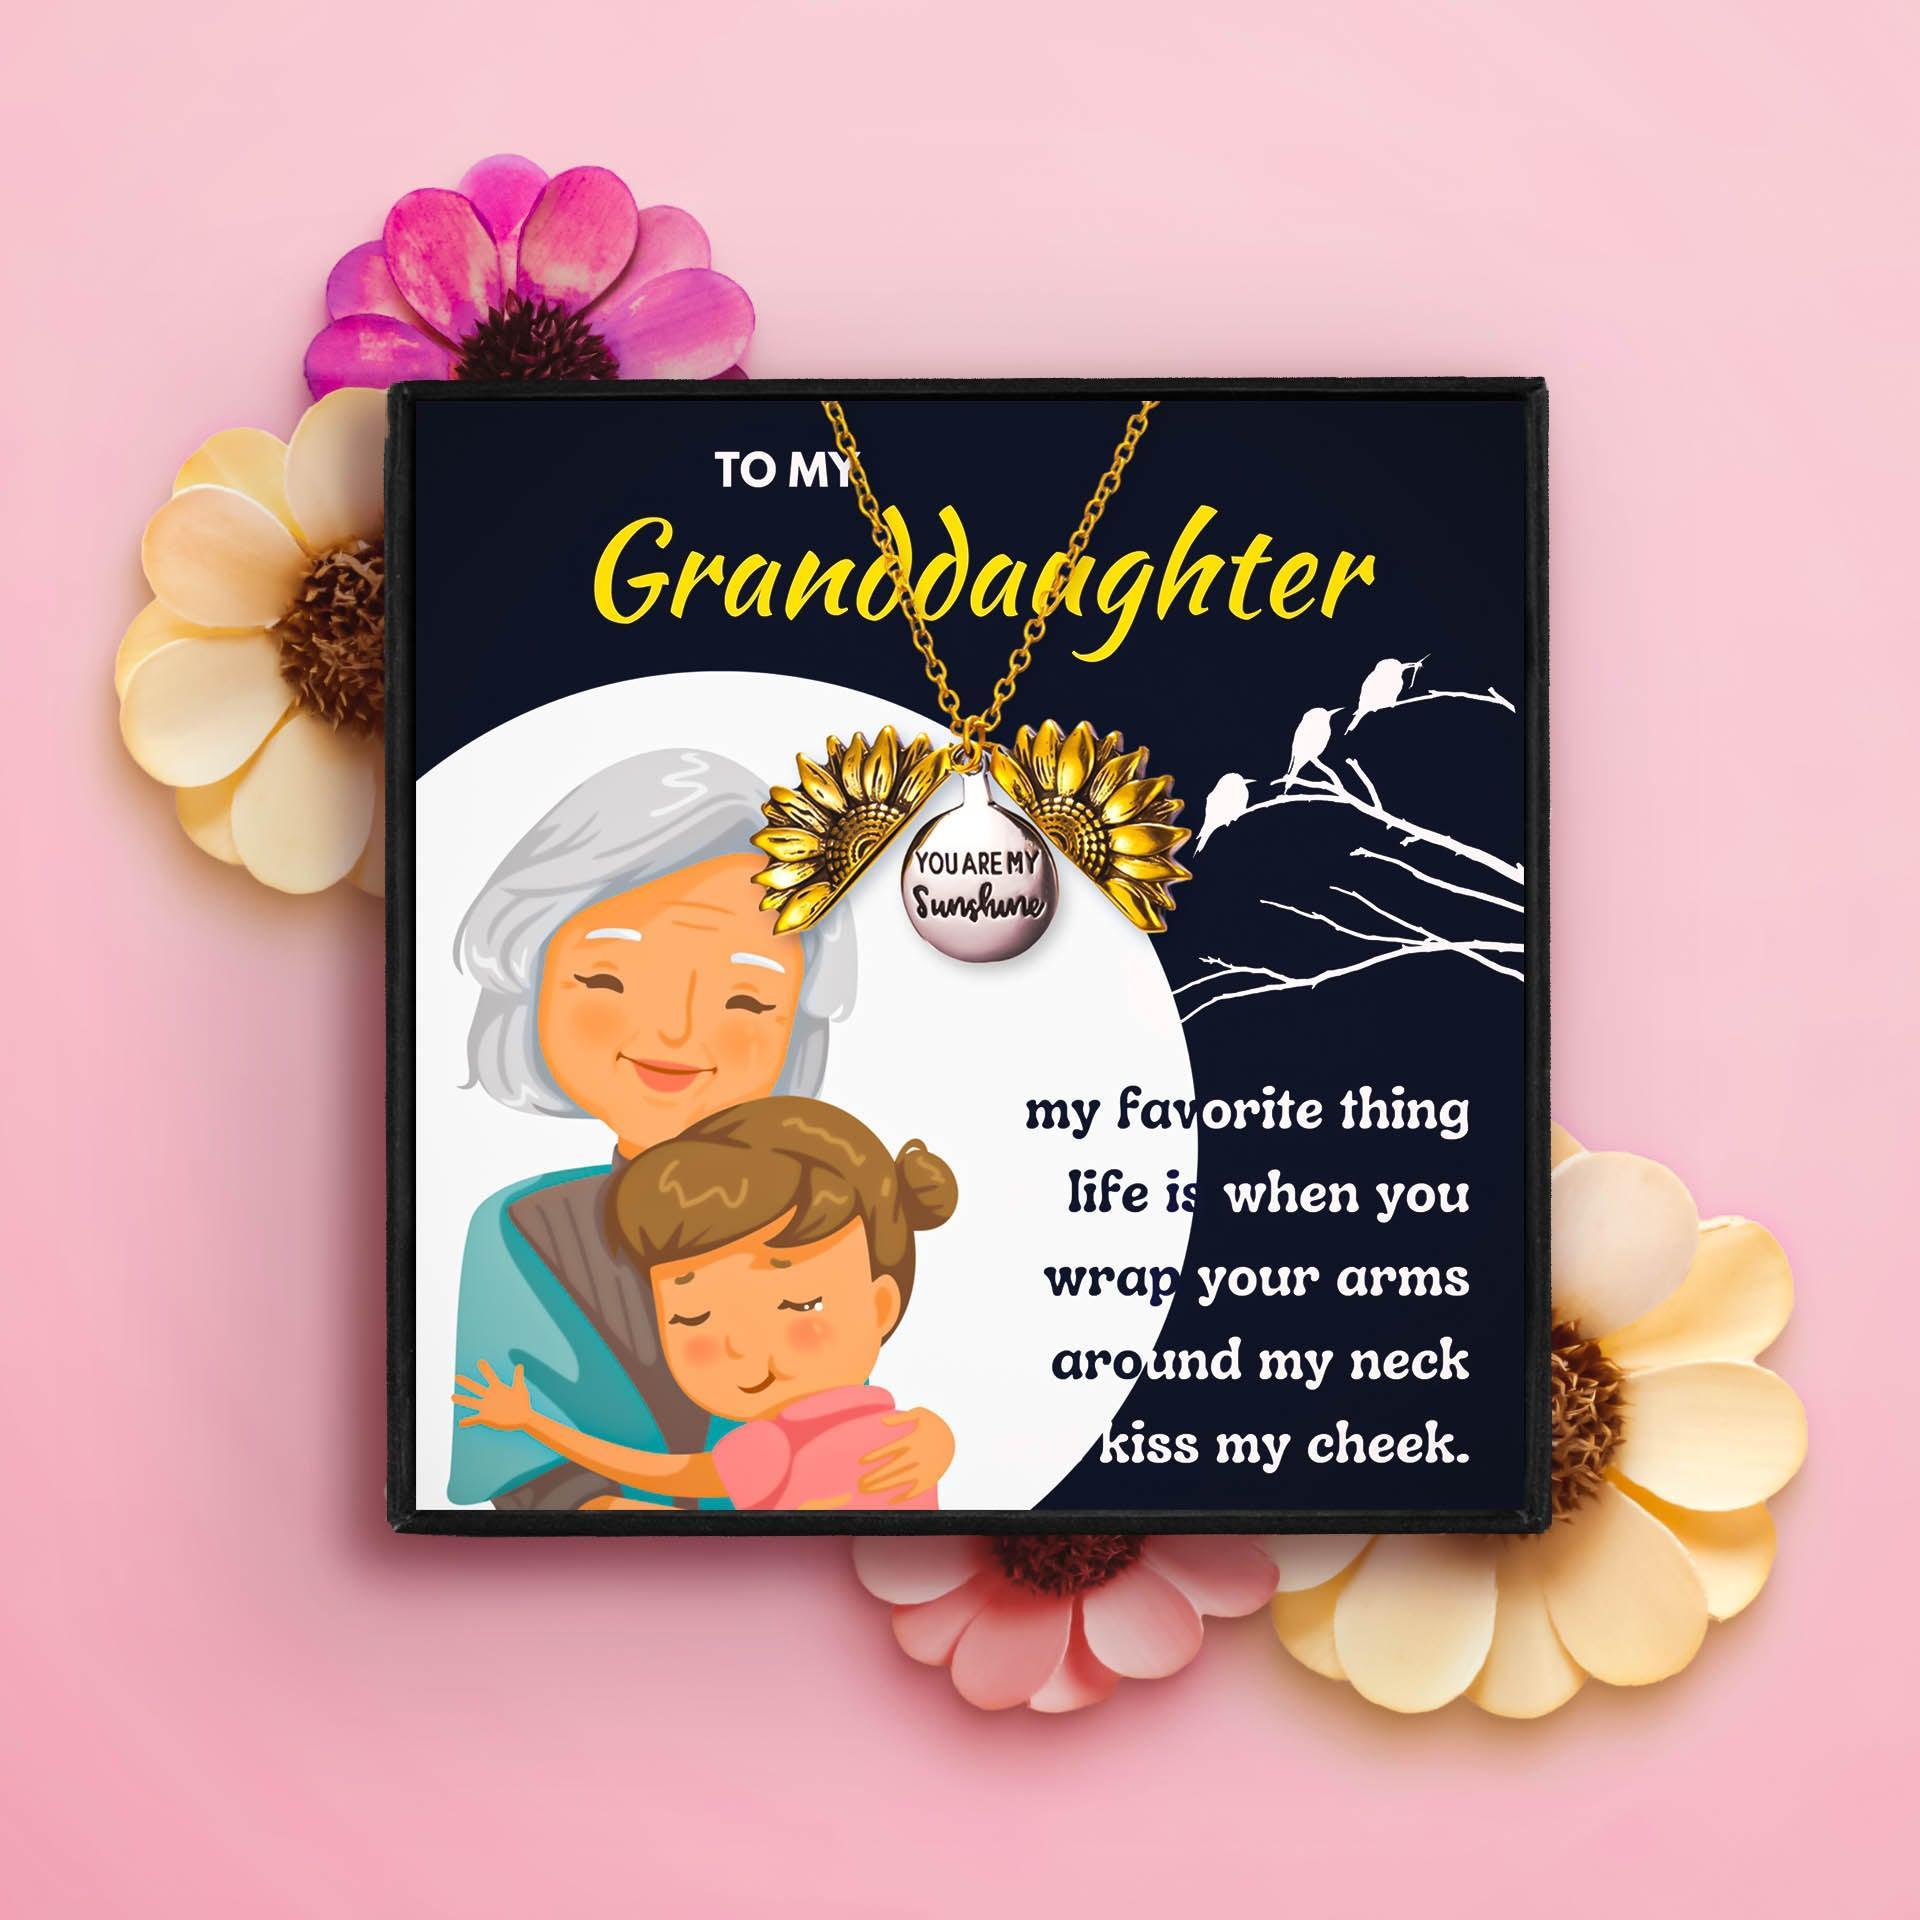 Meaningful Granddaughter Gifts From Grandparents in 2023 | Meaningful Granddaughter Gifts From Grandparents - undefined | granddaughter gift, granddaughter gifts from nana, granddaughter necklace from grandma, grandma granddaughter necklace, personalized granddaughter jewelry, to my granddaughter necklace | From Hunny Life | hunnylife.com